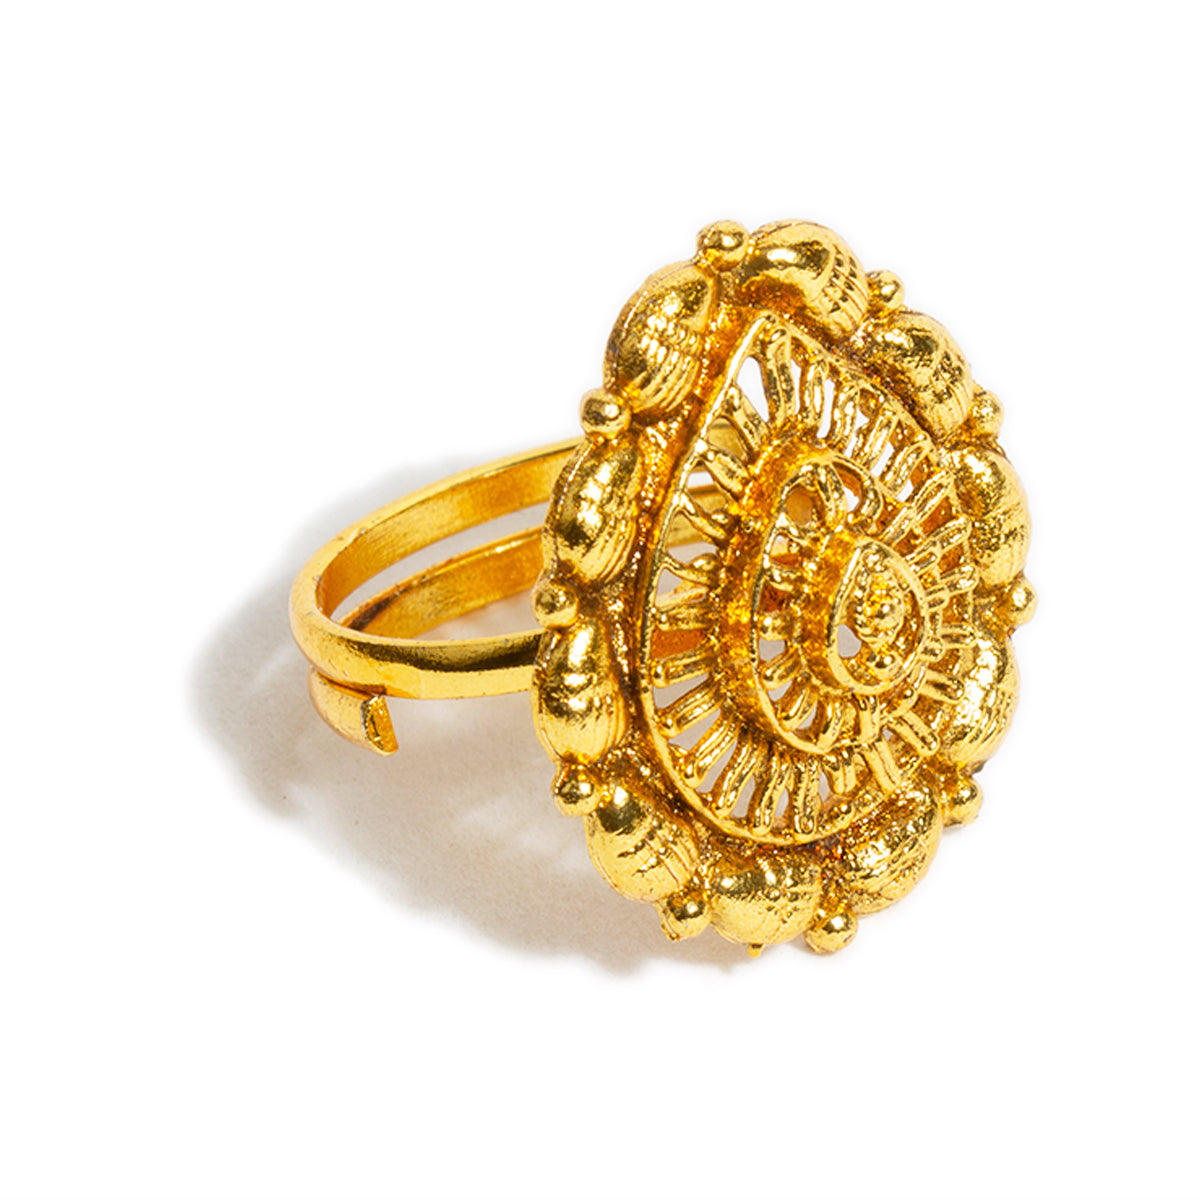 Women 92 Ladies Gold Ring, 4gm at best price in Hisar | ID: 22263713362